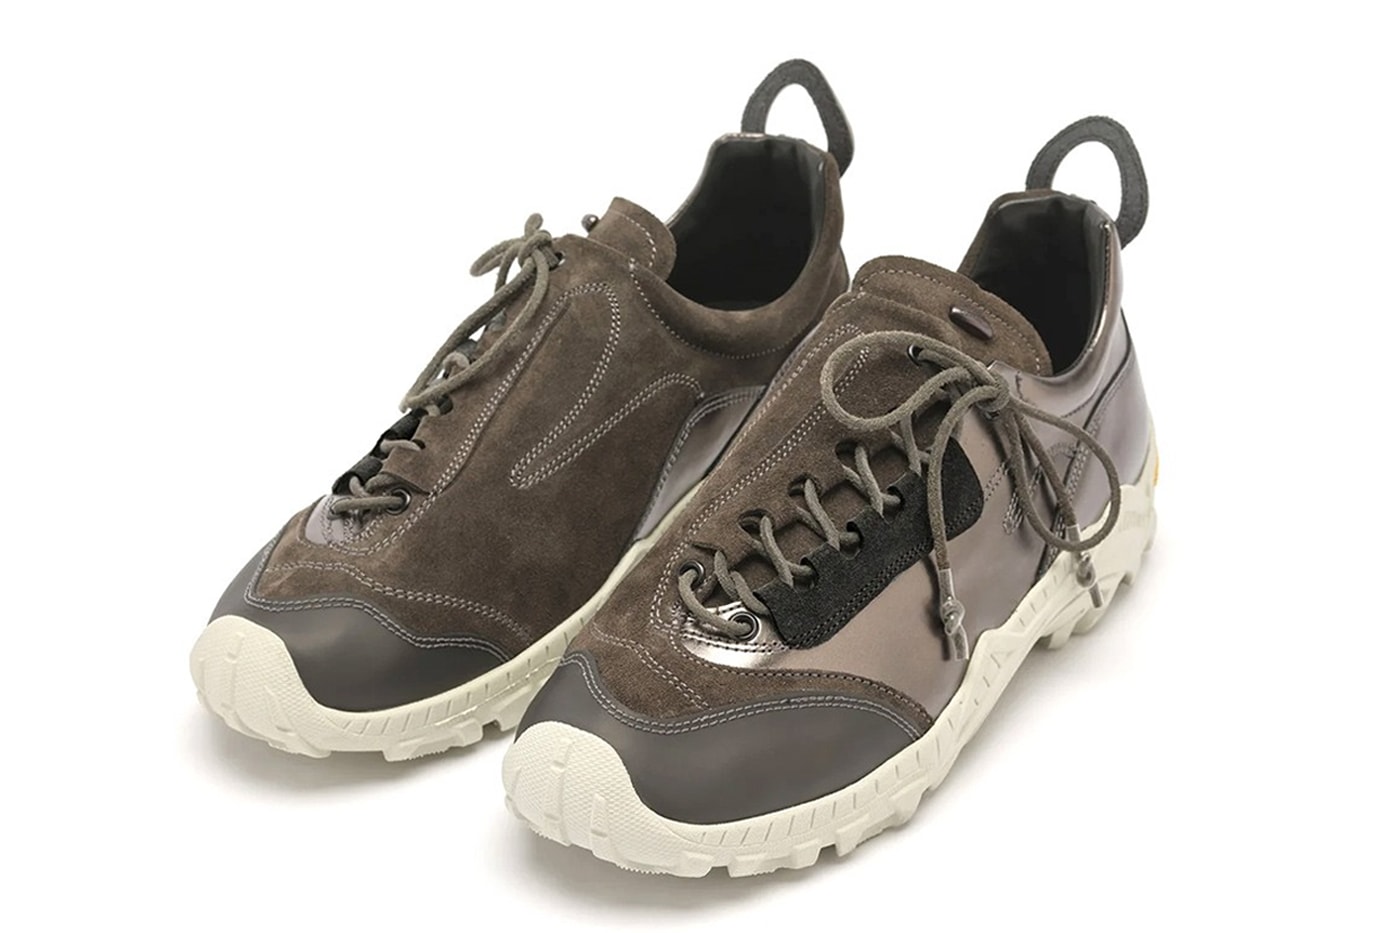 our legacy gabe chrome peak shoe vibram release date info store list buying guide photos price 